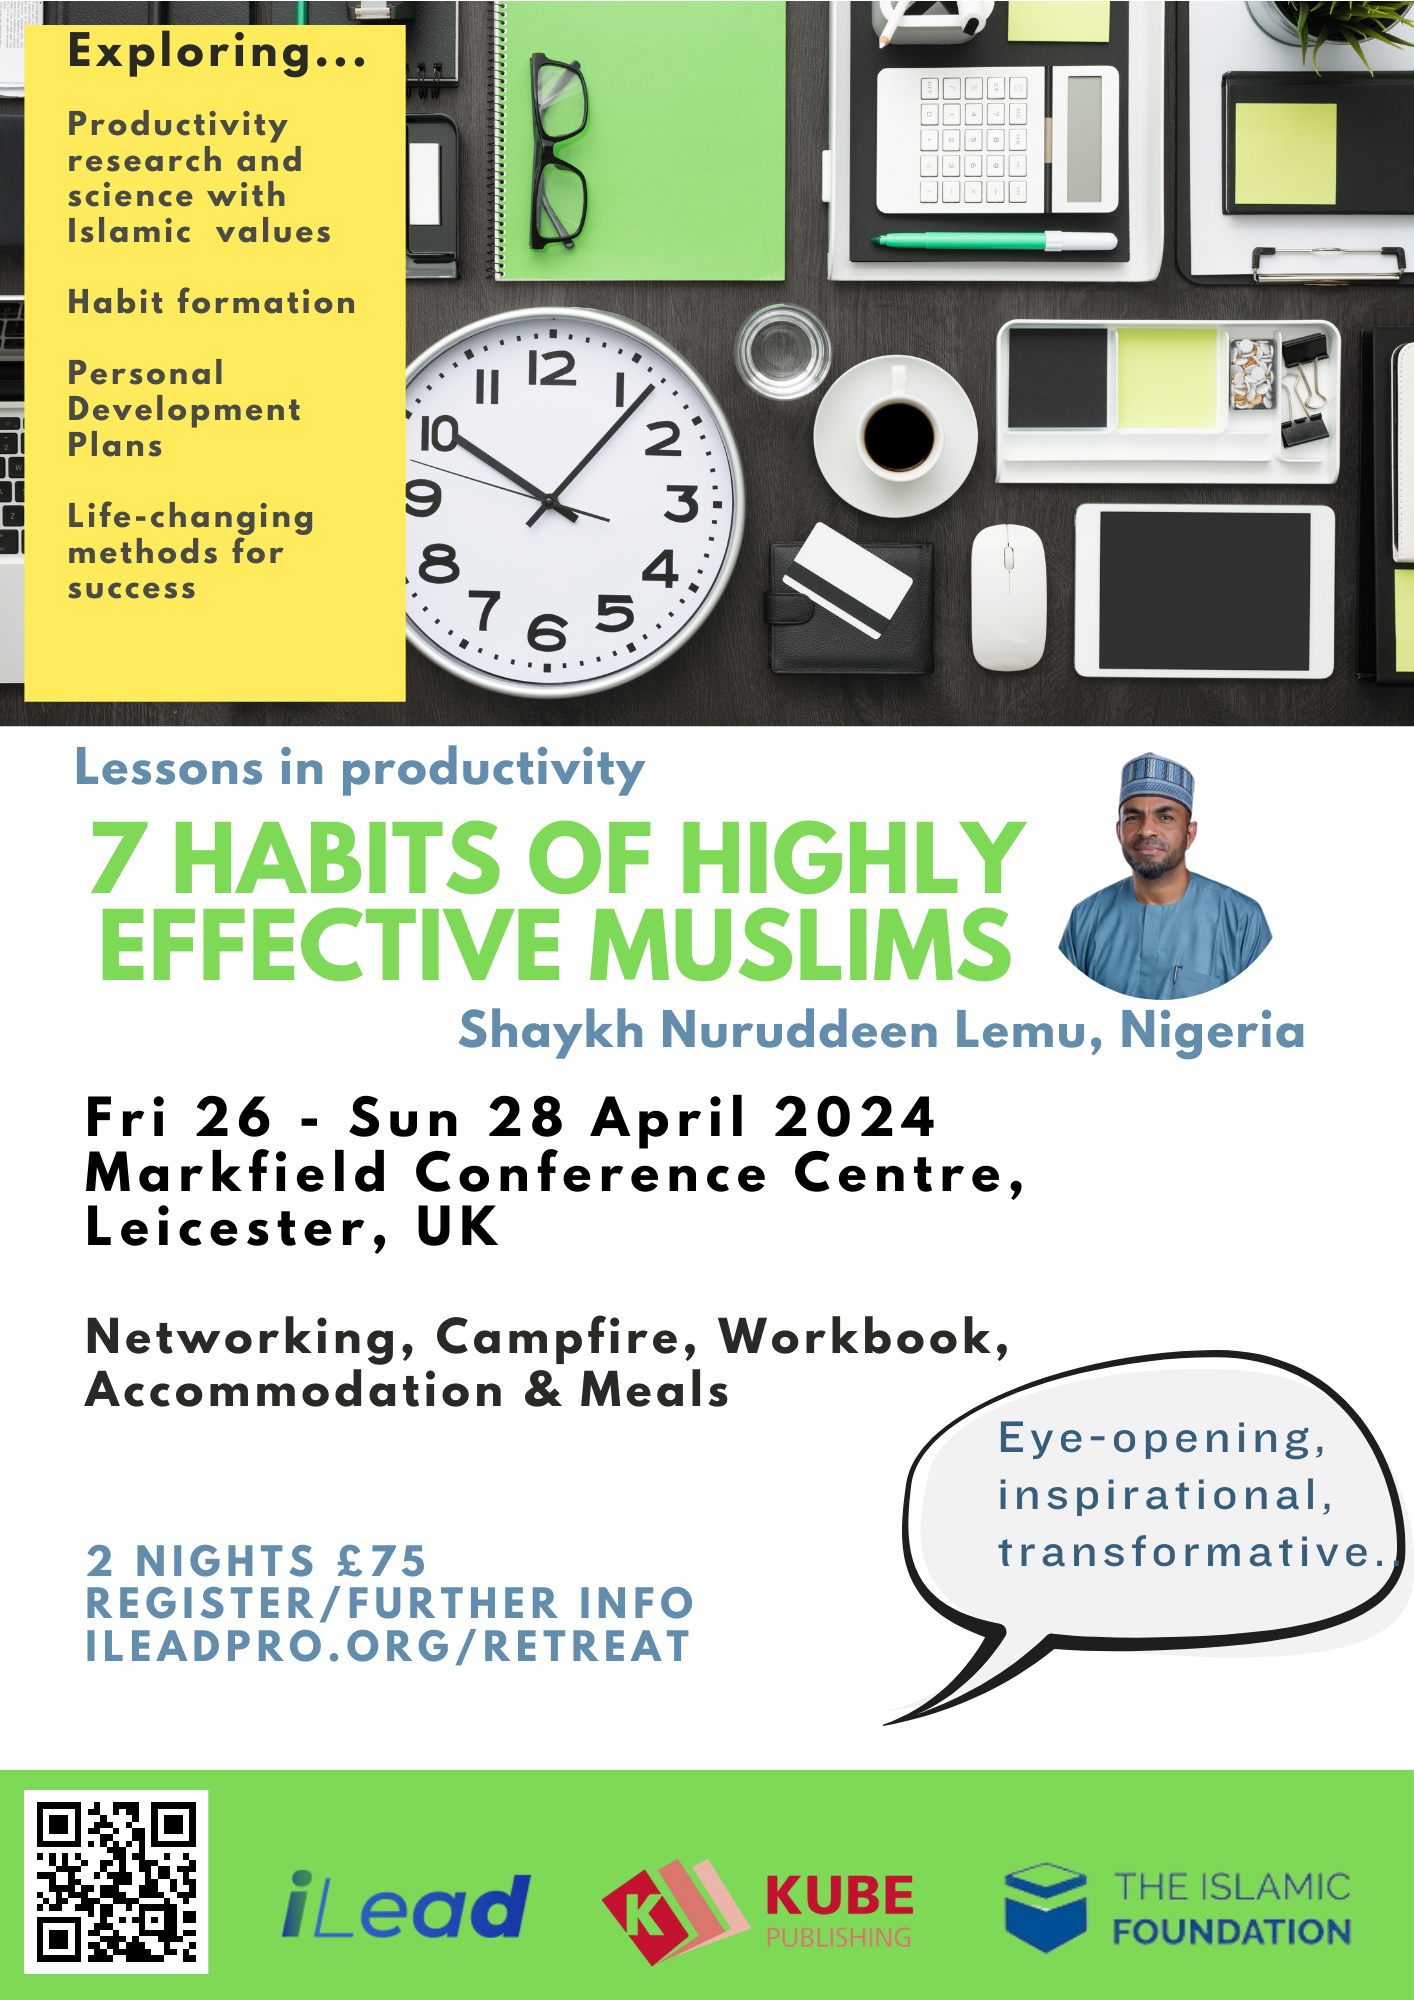 The Seven habits of Highly Effective Muslims